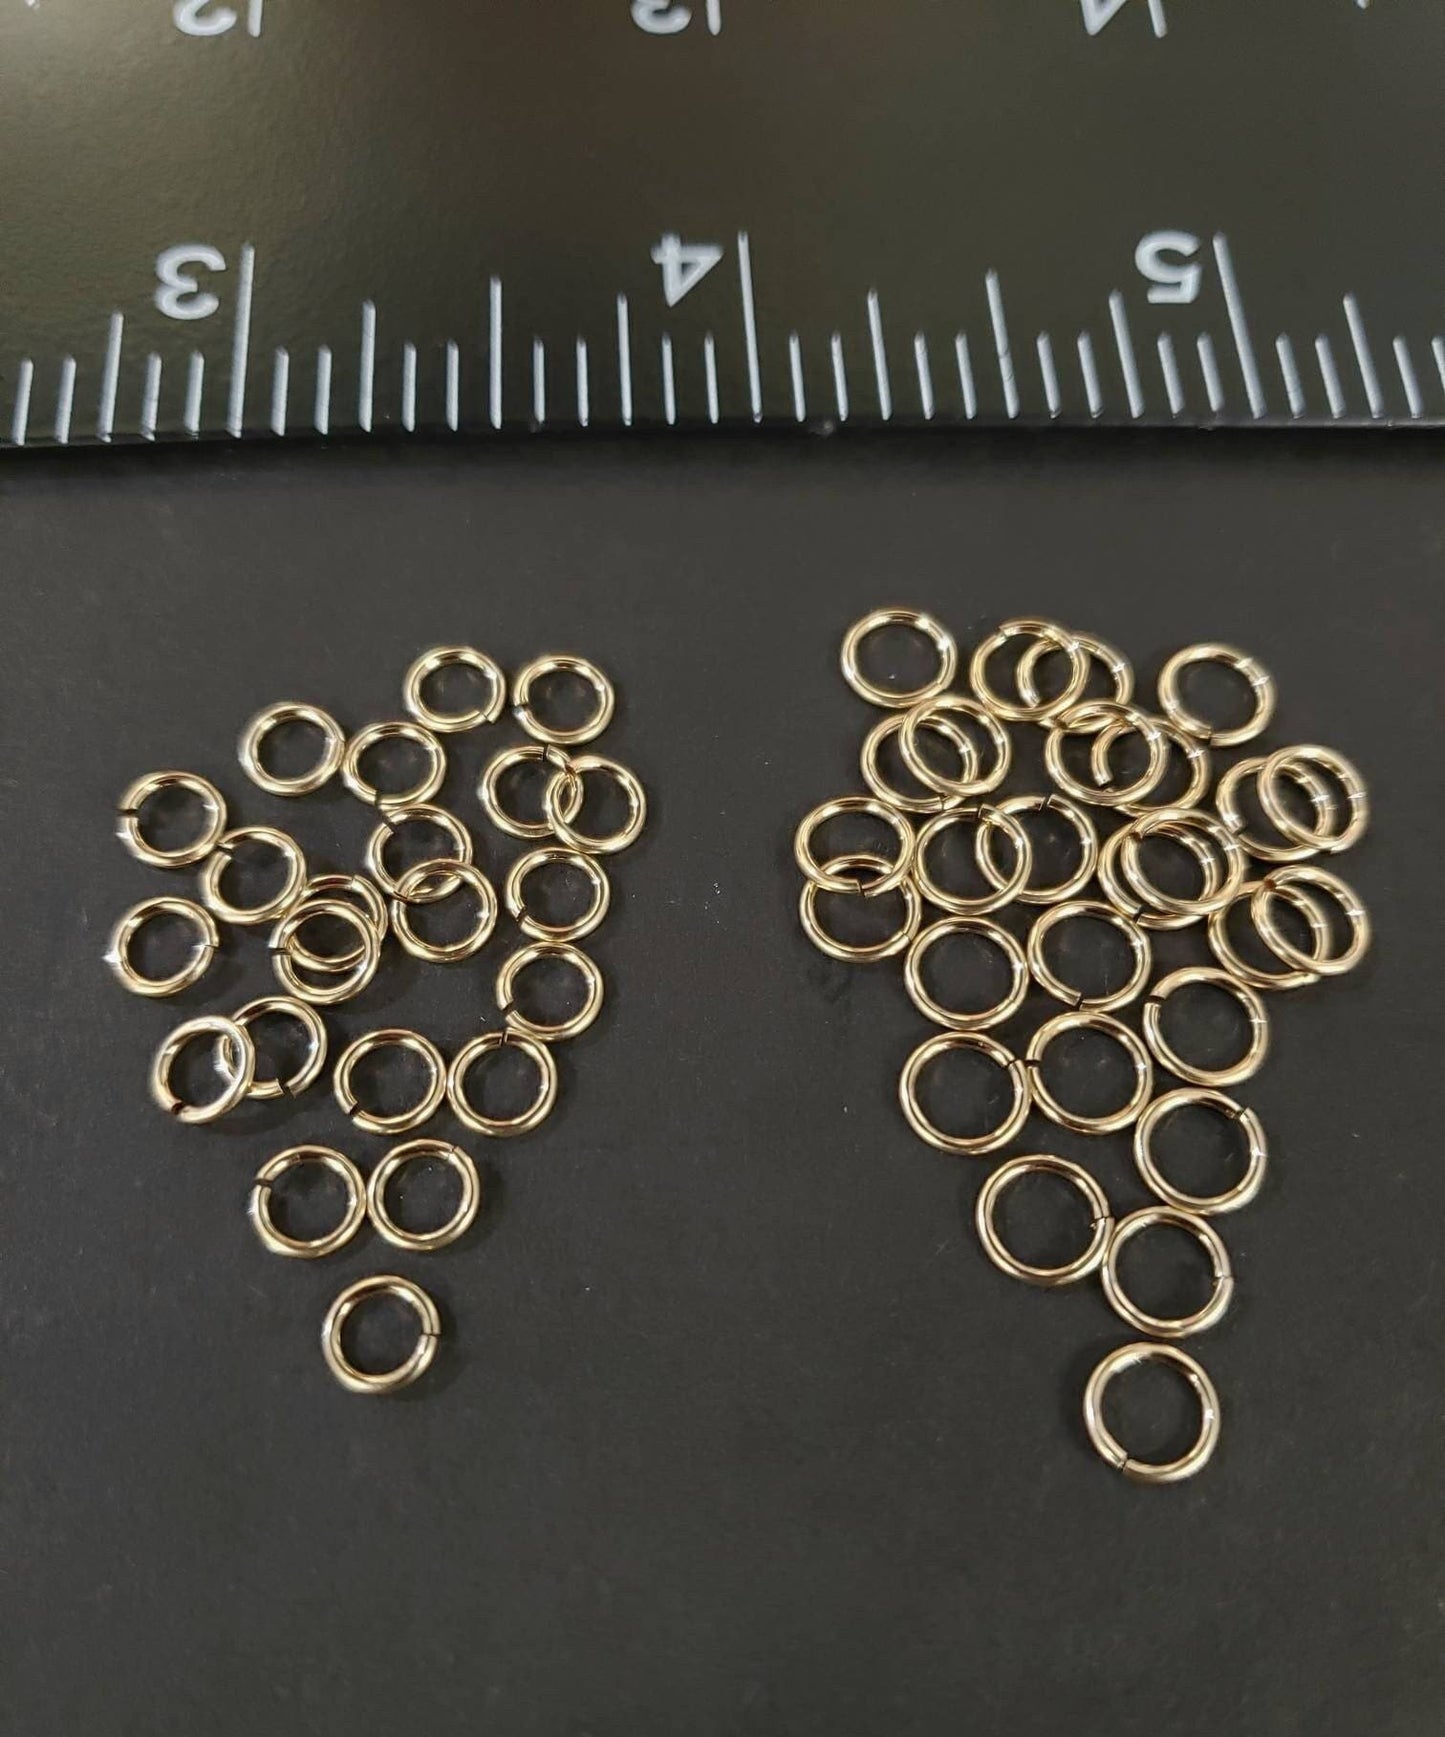 14K Gold Filled 5mm and 6mm 22g open Jumping, made in USA, high quality jewelry supplies, 20,50,100 pcs